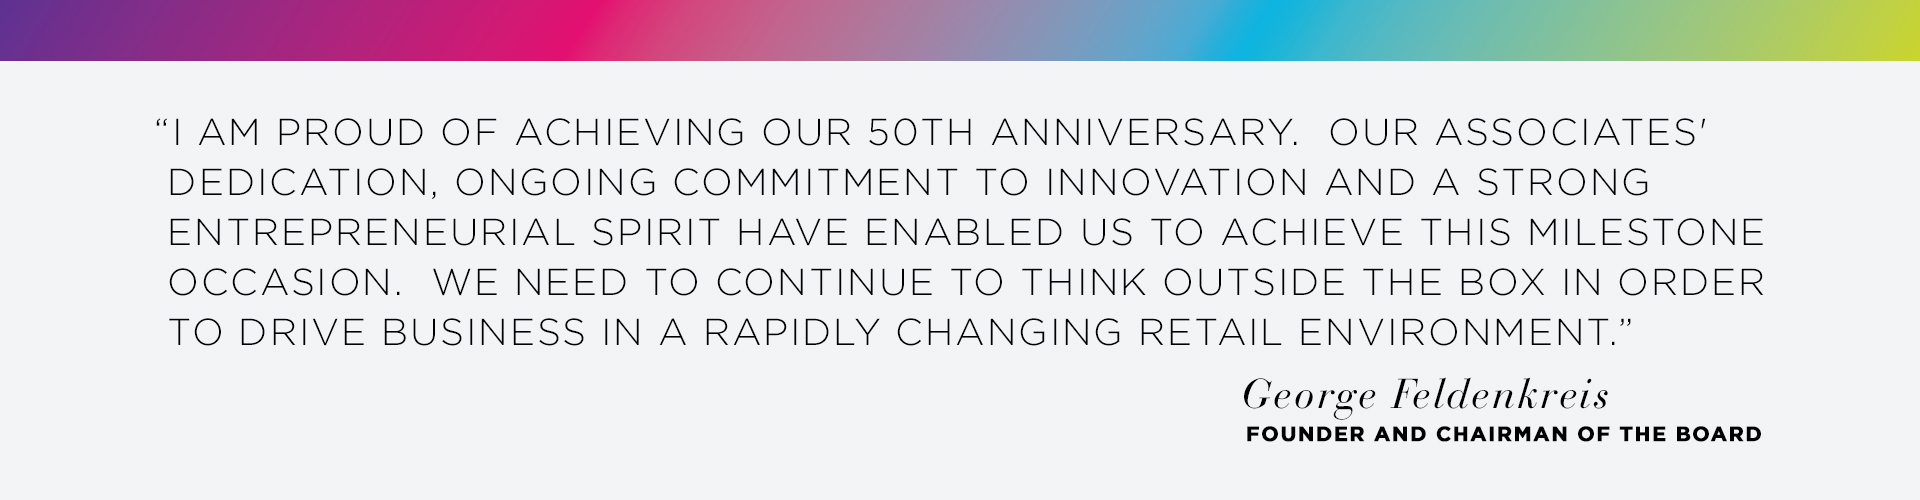 I am proud of achieving our 50th anniversary. Our associates dedication, ongoing commitment to innovation and a strong entrepreneurial spirit have enabled us to achieve this milestone occasion. We need to continue to think outside the box in order to drive bussiness in a rapidly changing retail environment. - George Feldenkreis